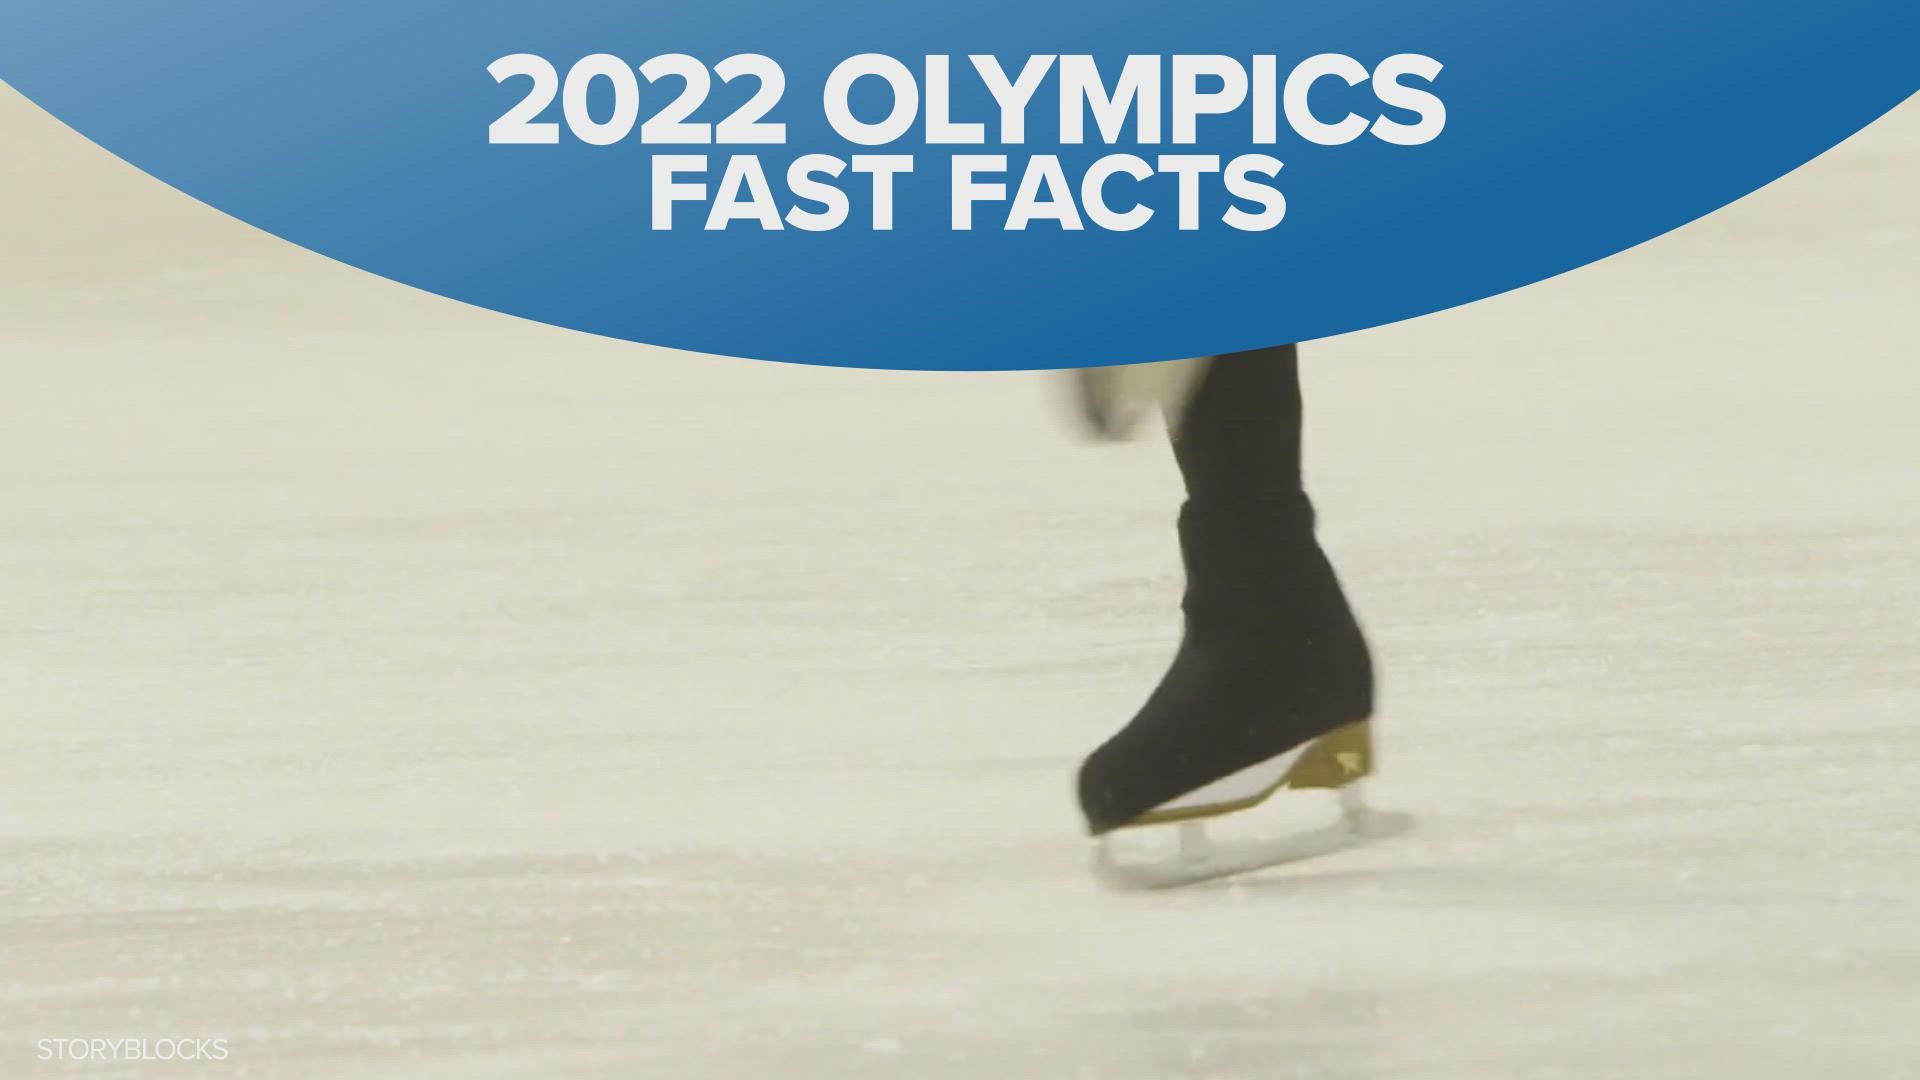 How to watch the 2022 Winter Olympics on KING 5 king5